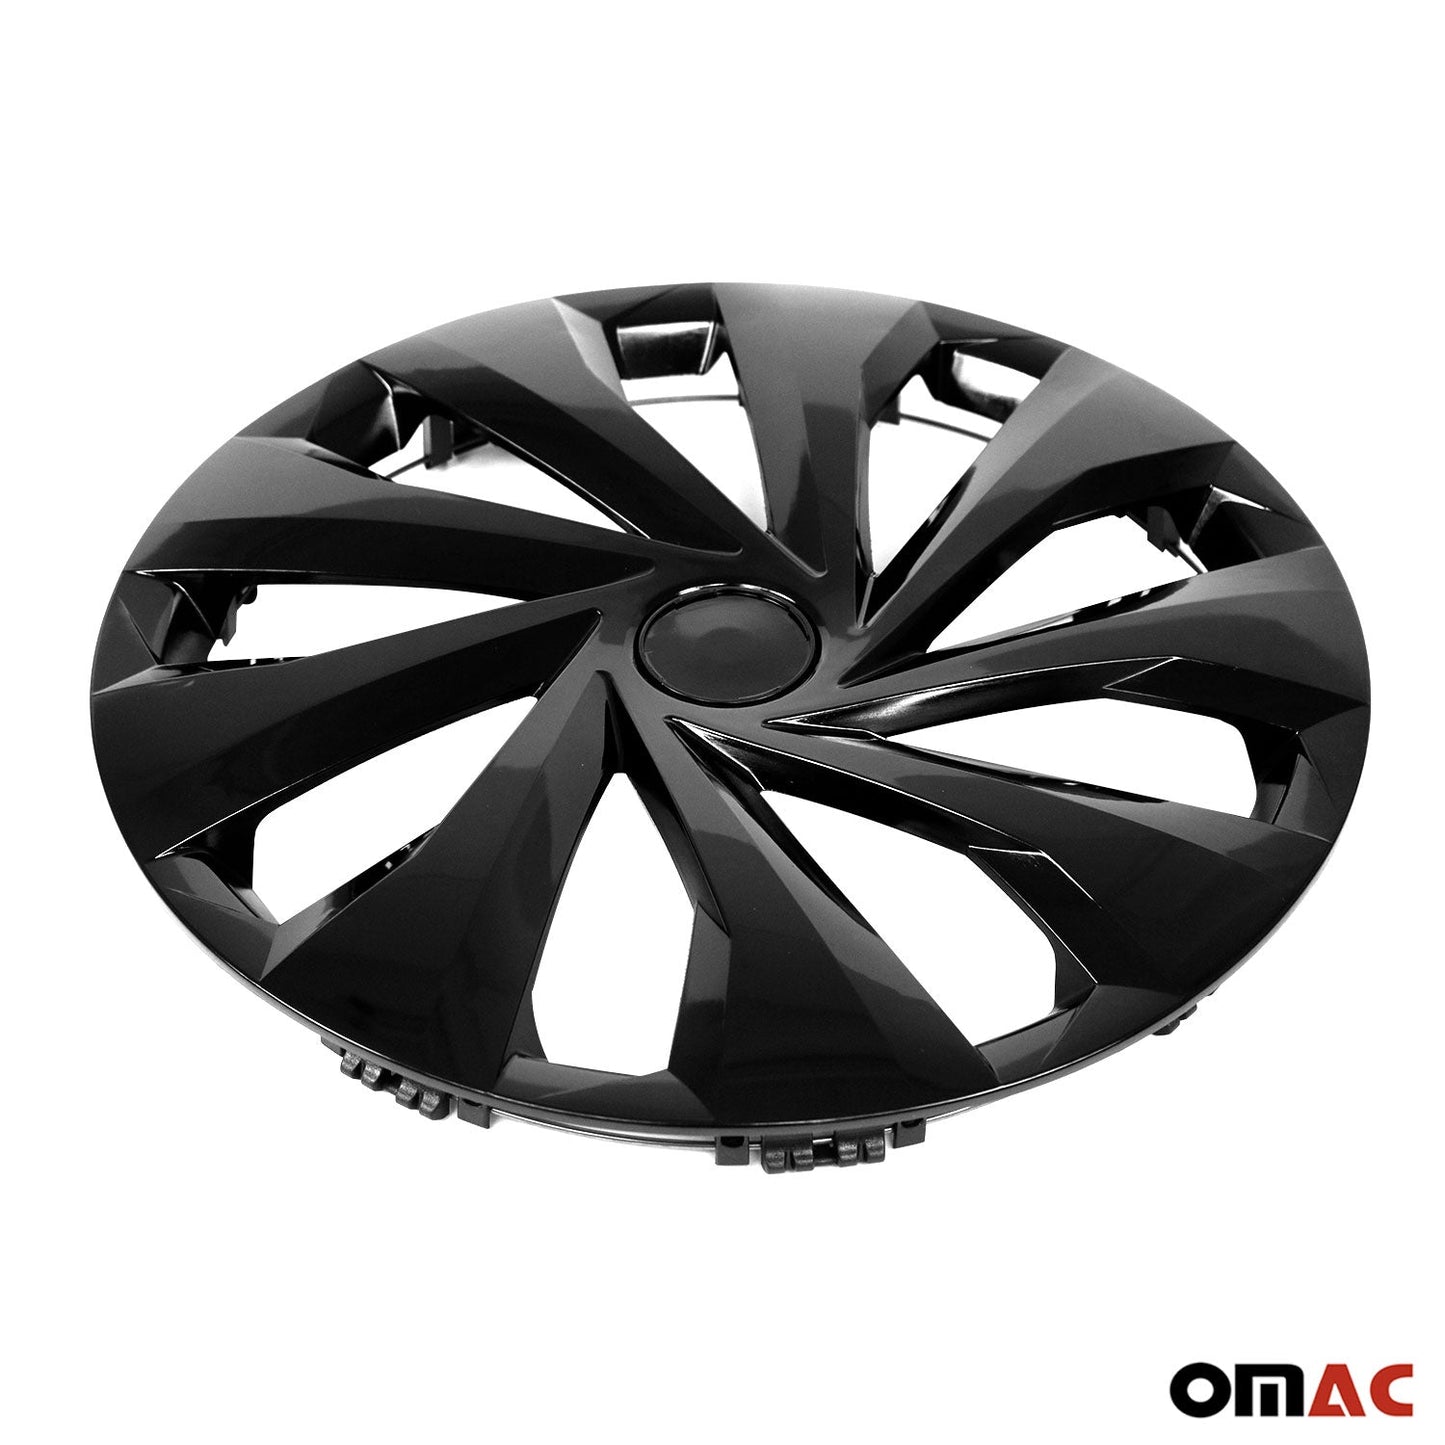 OMAC 15 Inch Wheel Rim Covers Hubcaps for VW Black Gloss A046298